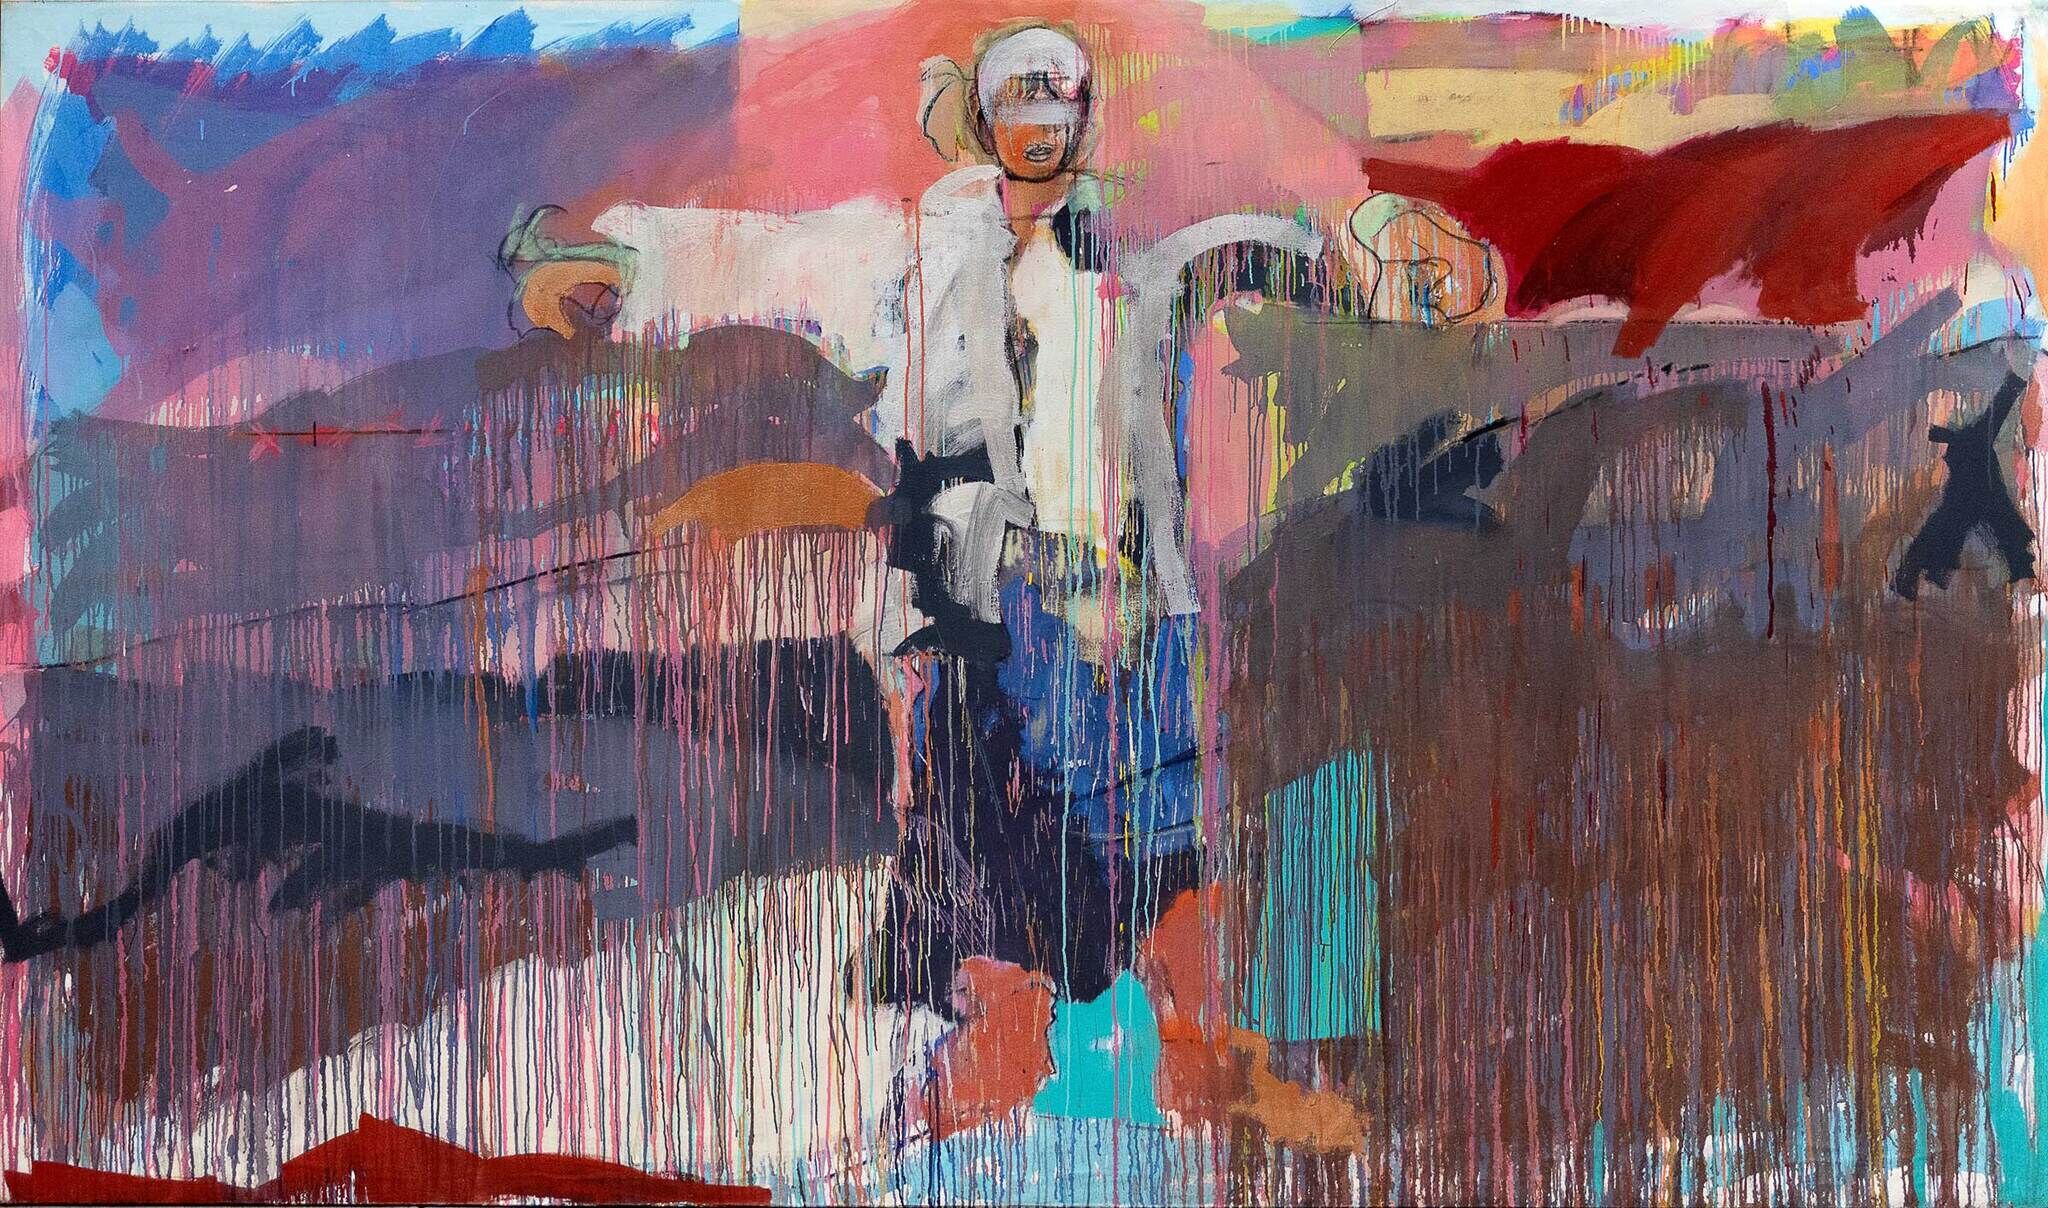 Abstract painting with vibrant colors and a central figure resembling a person in a white coat with indistinct features.